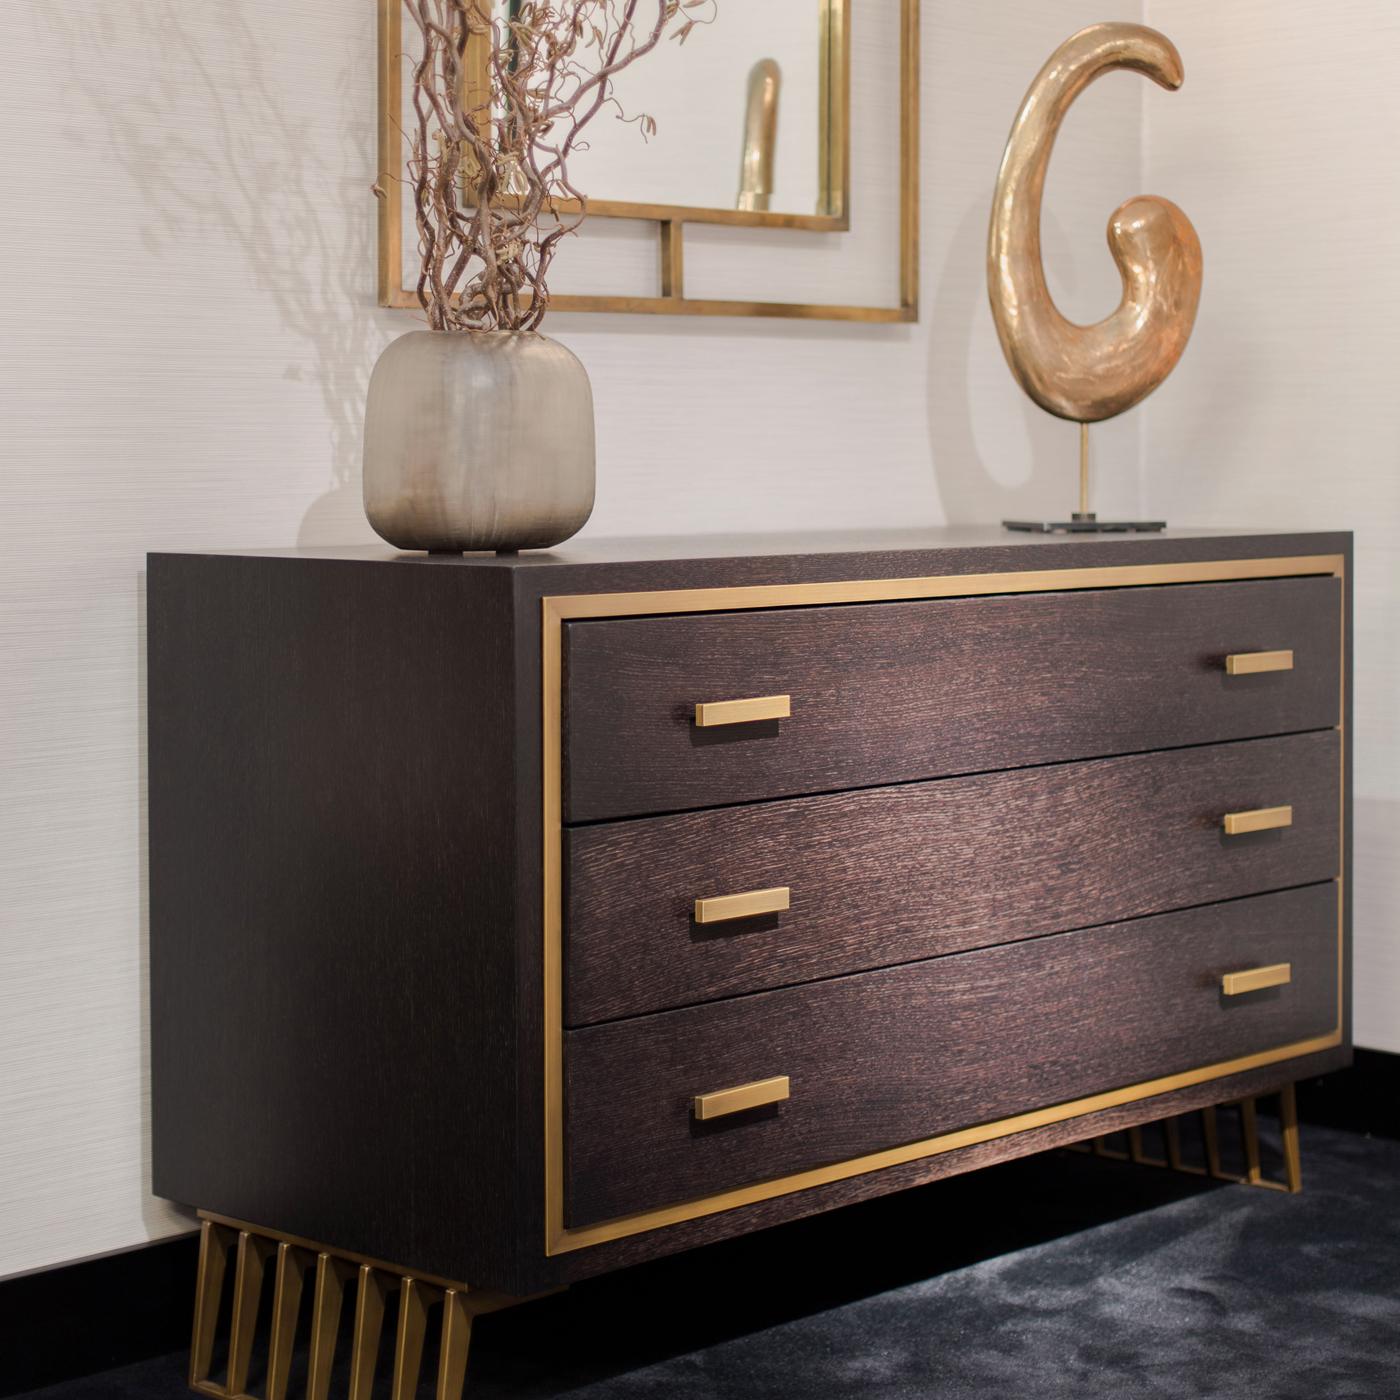 Standing on two openwork metal legs with a brass finish, this wooden dresser exudes restrained elegance and is be a perfect addition to a wide variety of refined interiors. Composed of three drawers with brass-finished metal handles, the structure